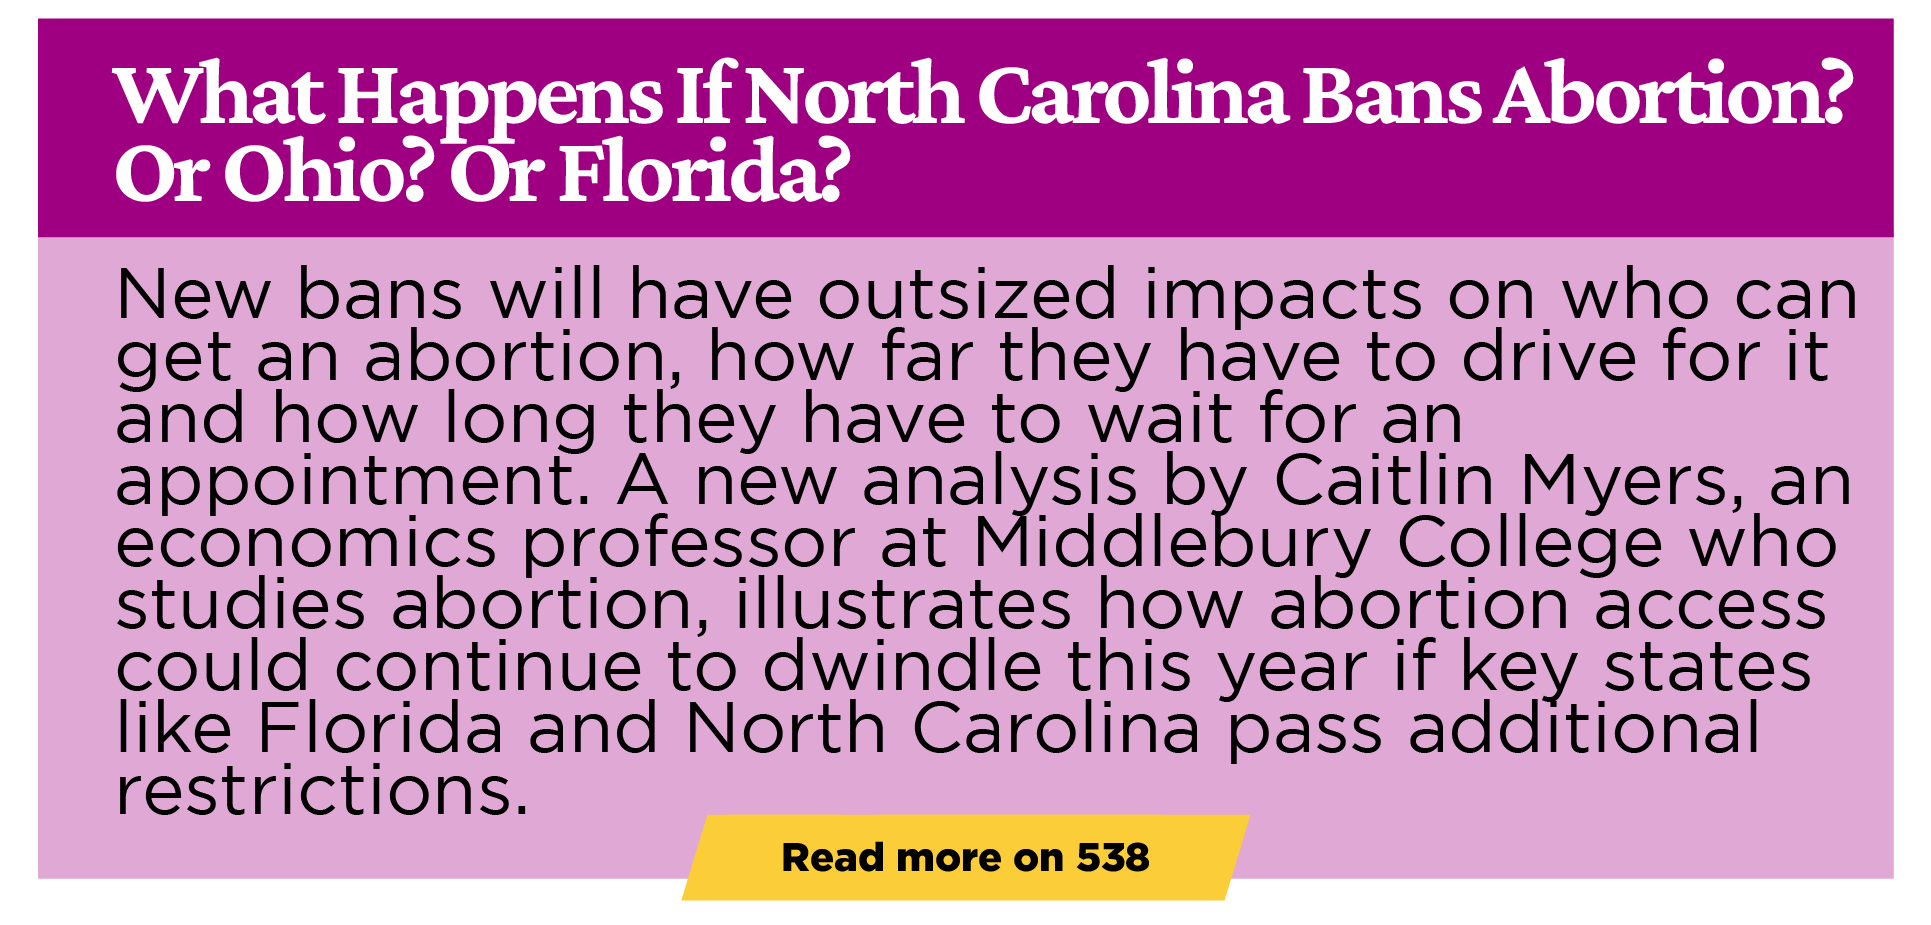 What Happens If North Carolina Bans Abortion? Or Ohio? Or Florida? New bans will have outsized impacts on who can get an abortion, how far they have to drive for it and how long they have to wait for an appointment. A new analysis by Caitlin Myers, an economics professor at Middlebury College who studies abortion, illustrates how abortion access could continue to dwindle this year if key states like Florida and North Carolina pass additional restrictions.